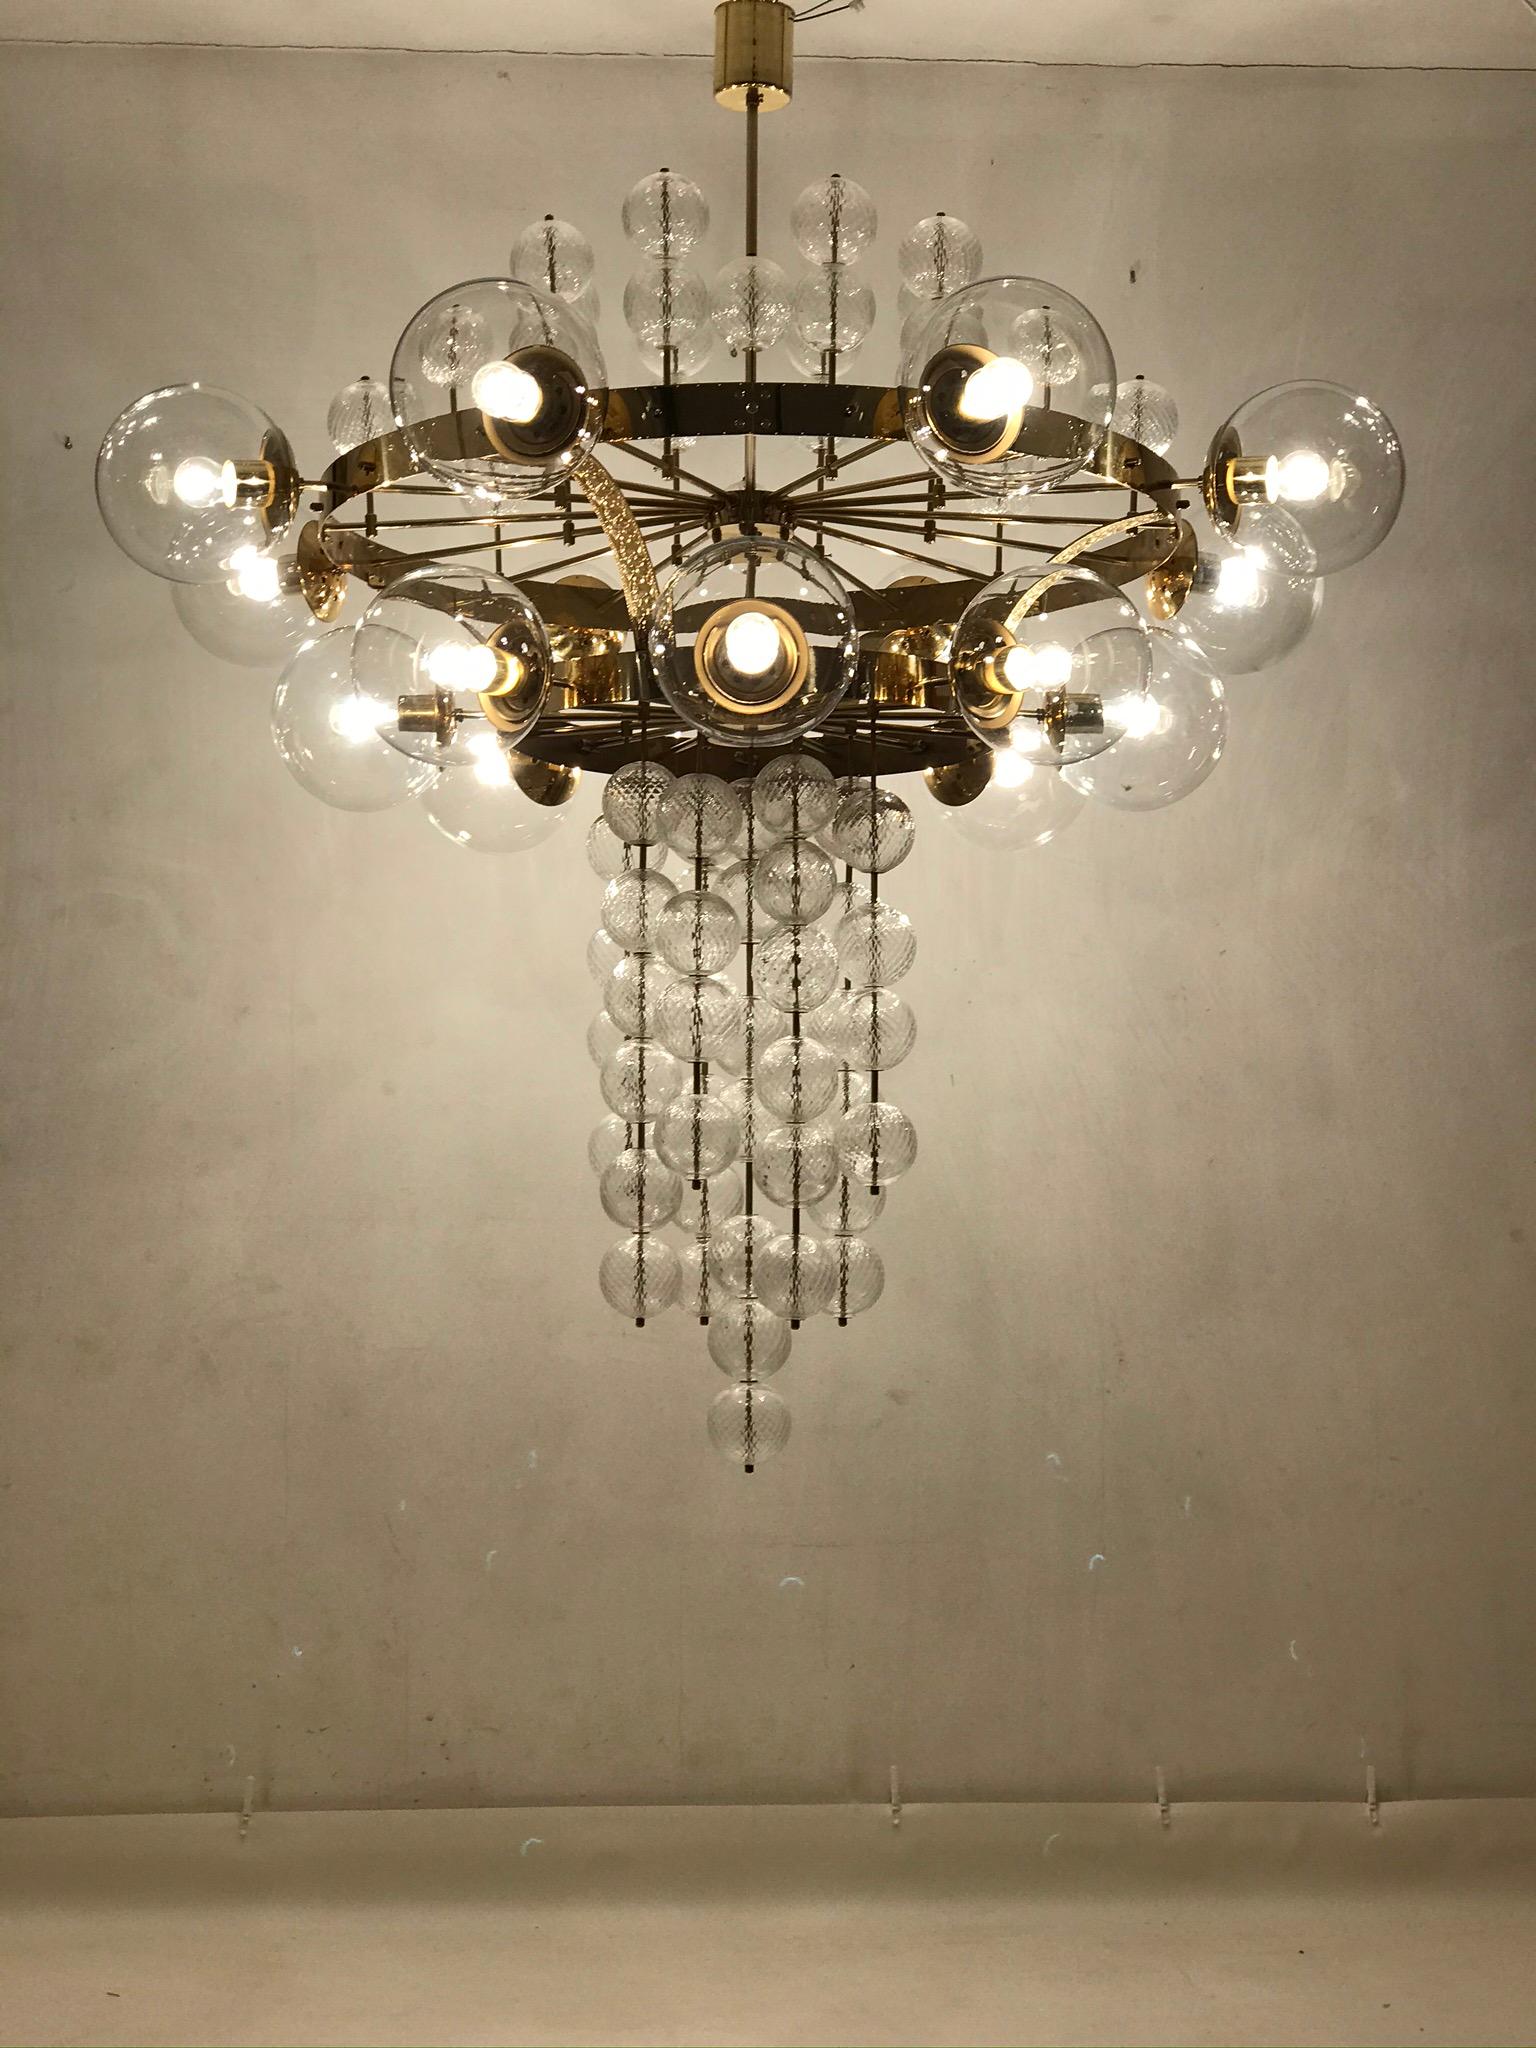 An unique chandelier from the 1965s. The brass construction is completed with the original patina. The chandelier has 16 glass balls which are hand blown. The condition is very nice. The chandelier is fitted with ten glass spheres of 22 cm in